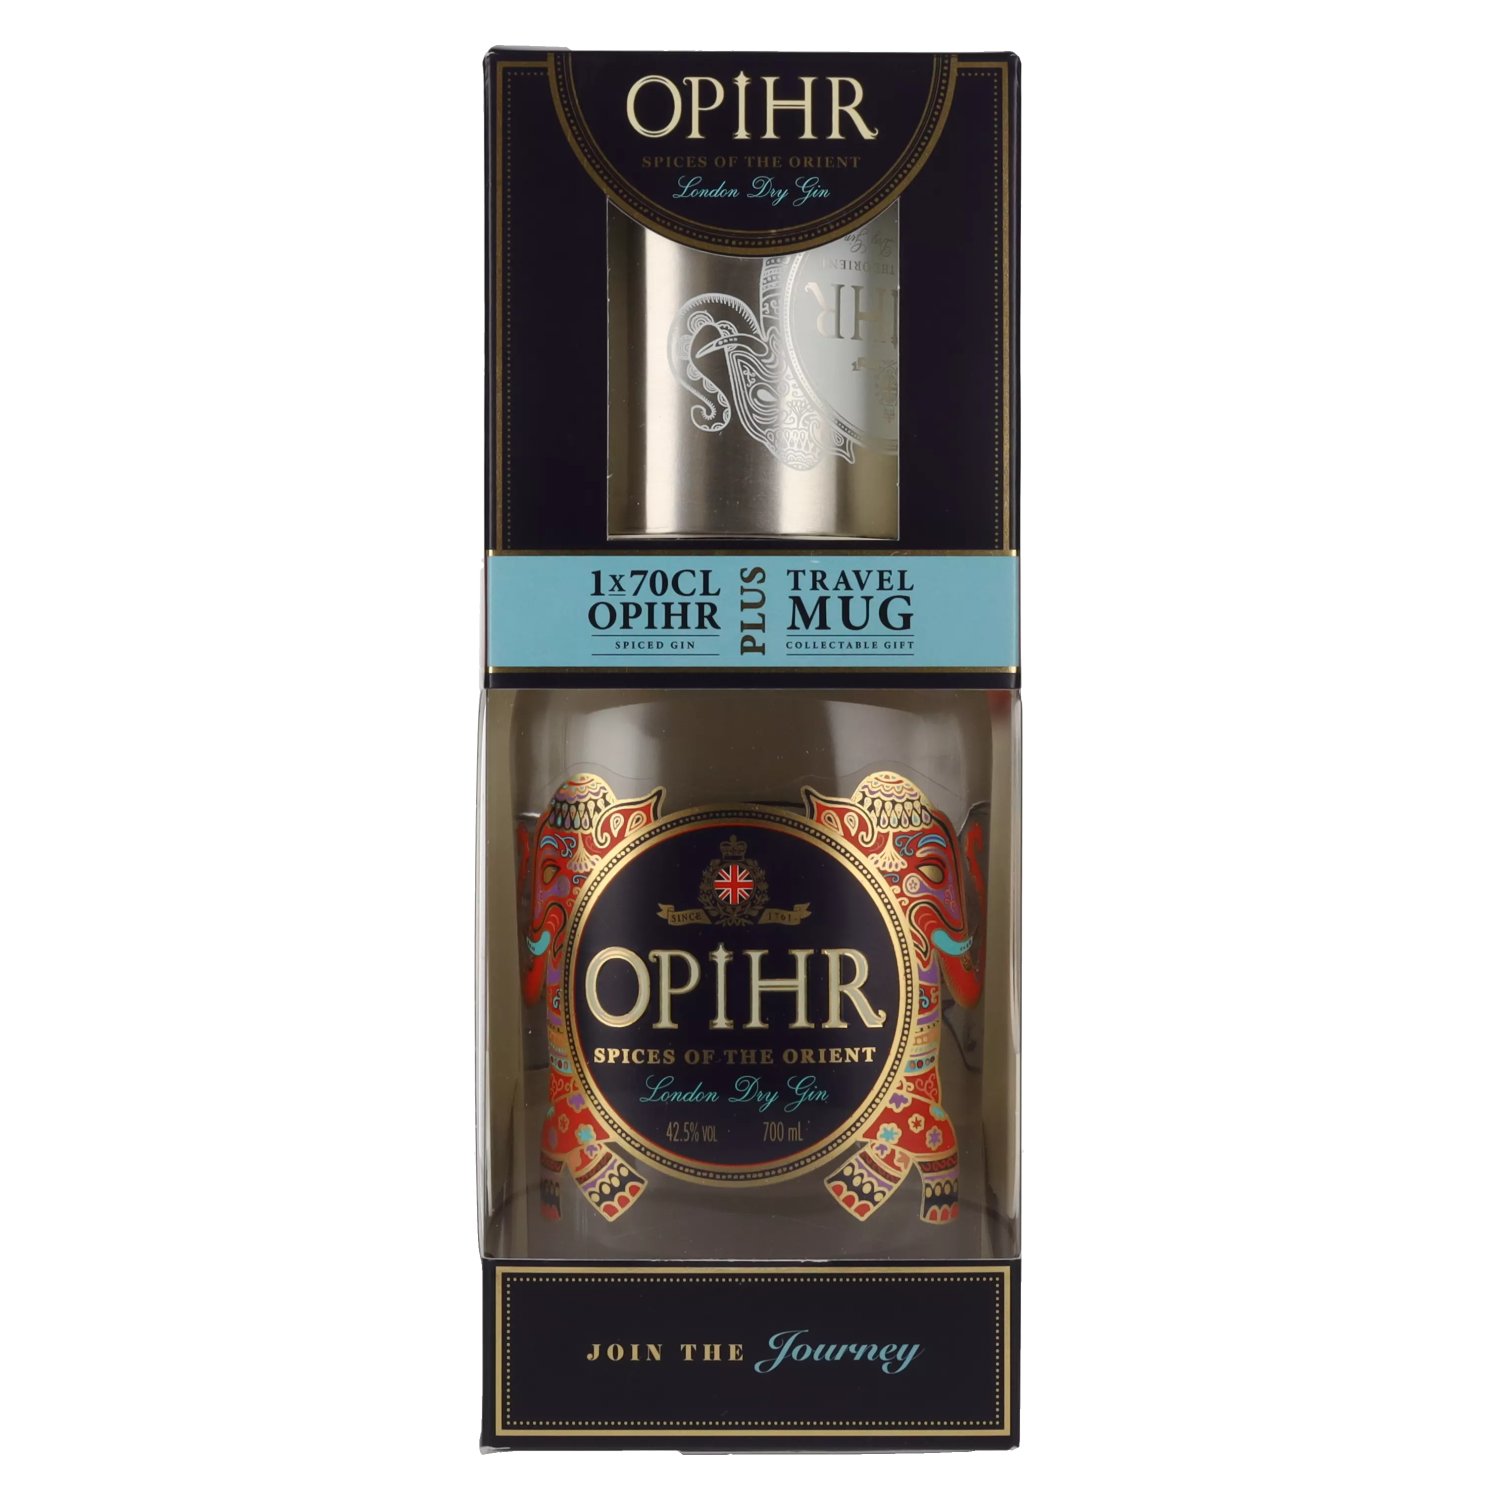 42,5% Vol. London Opihr in Mug SPICED Giftbox Gin 0,7l Travel with ORIENTAL Dry